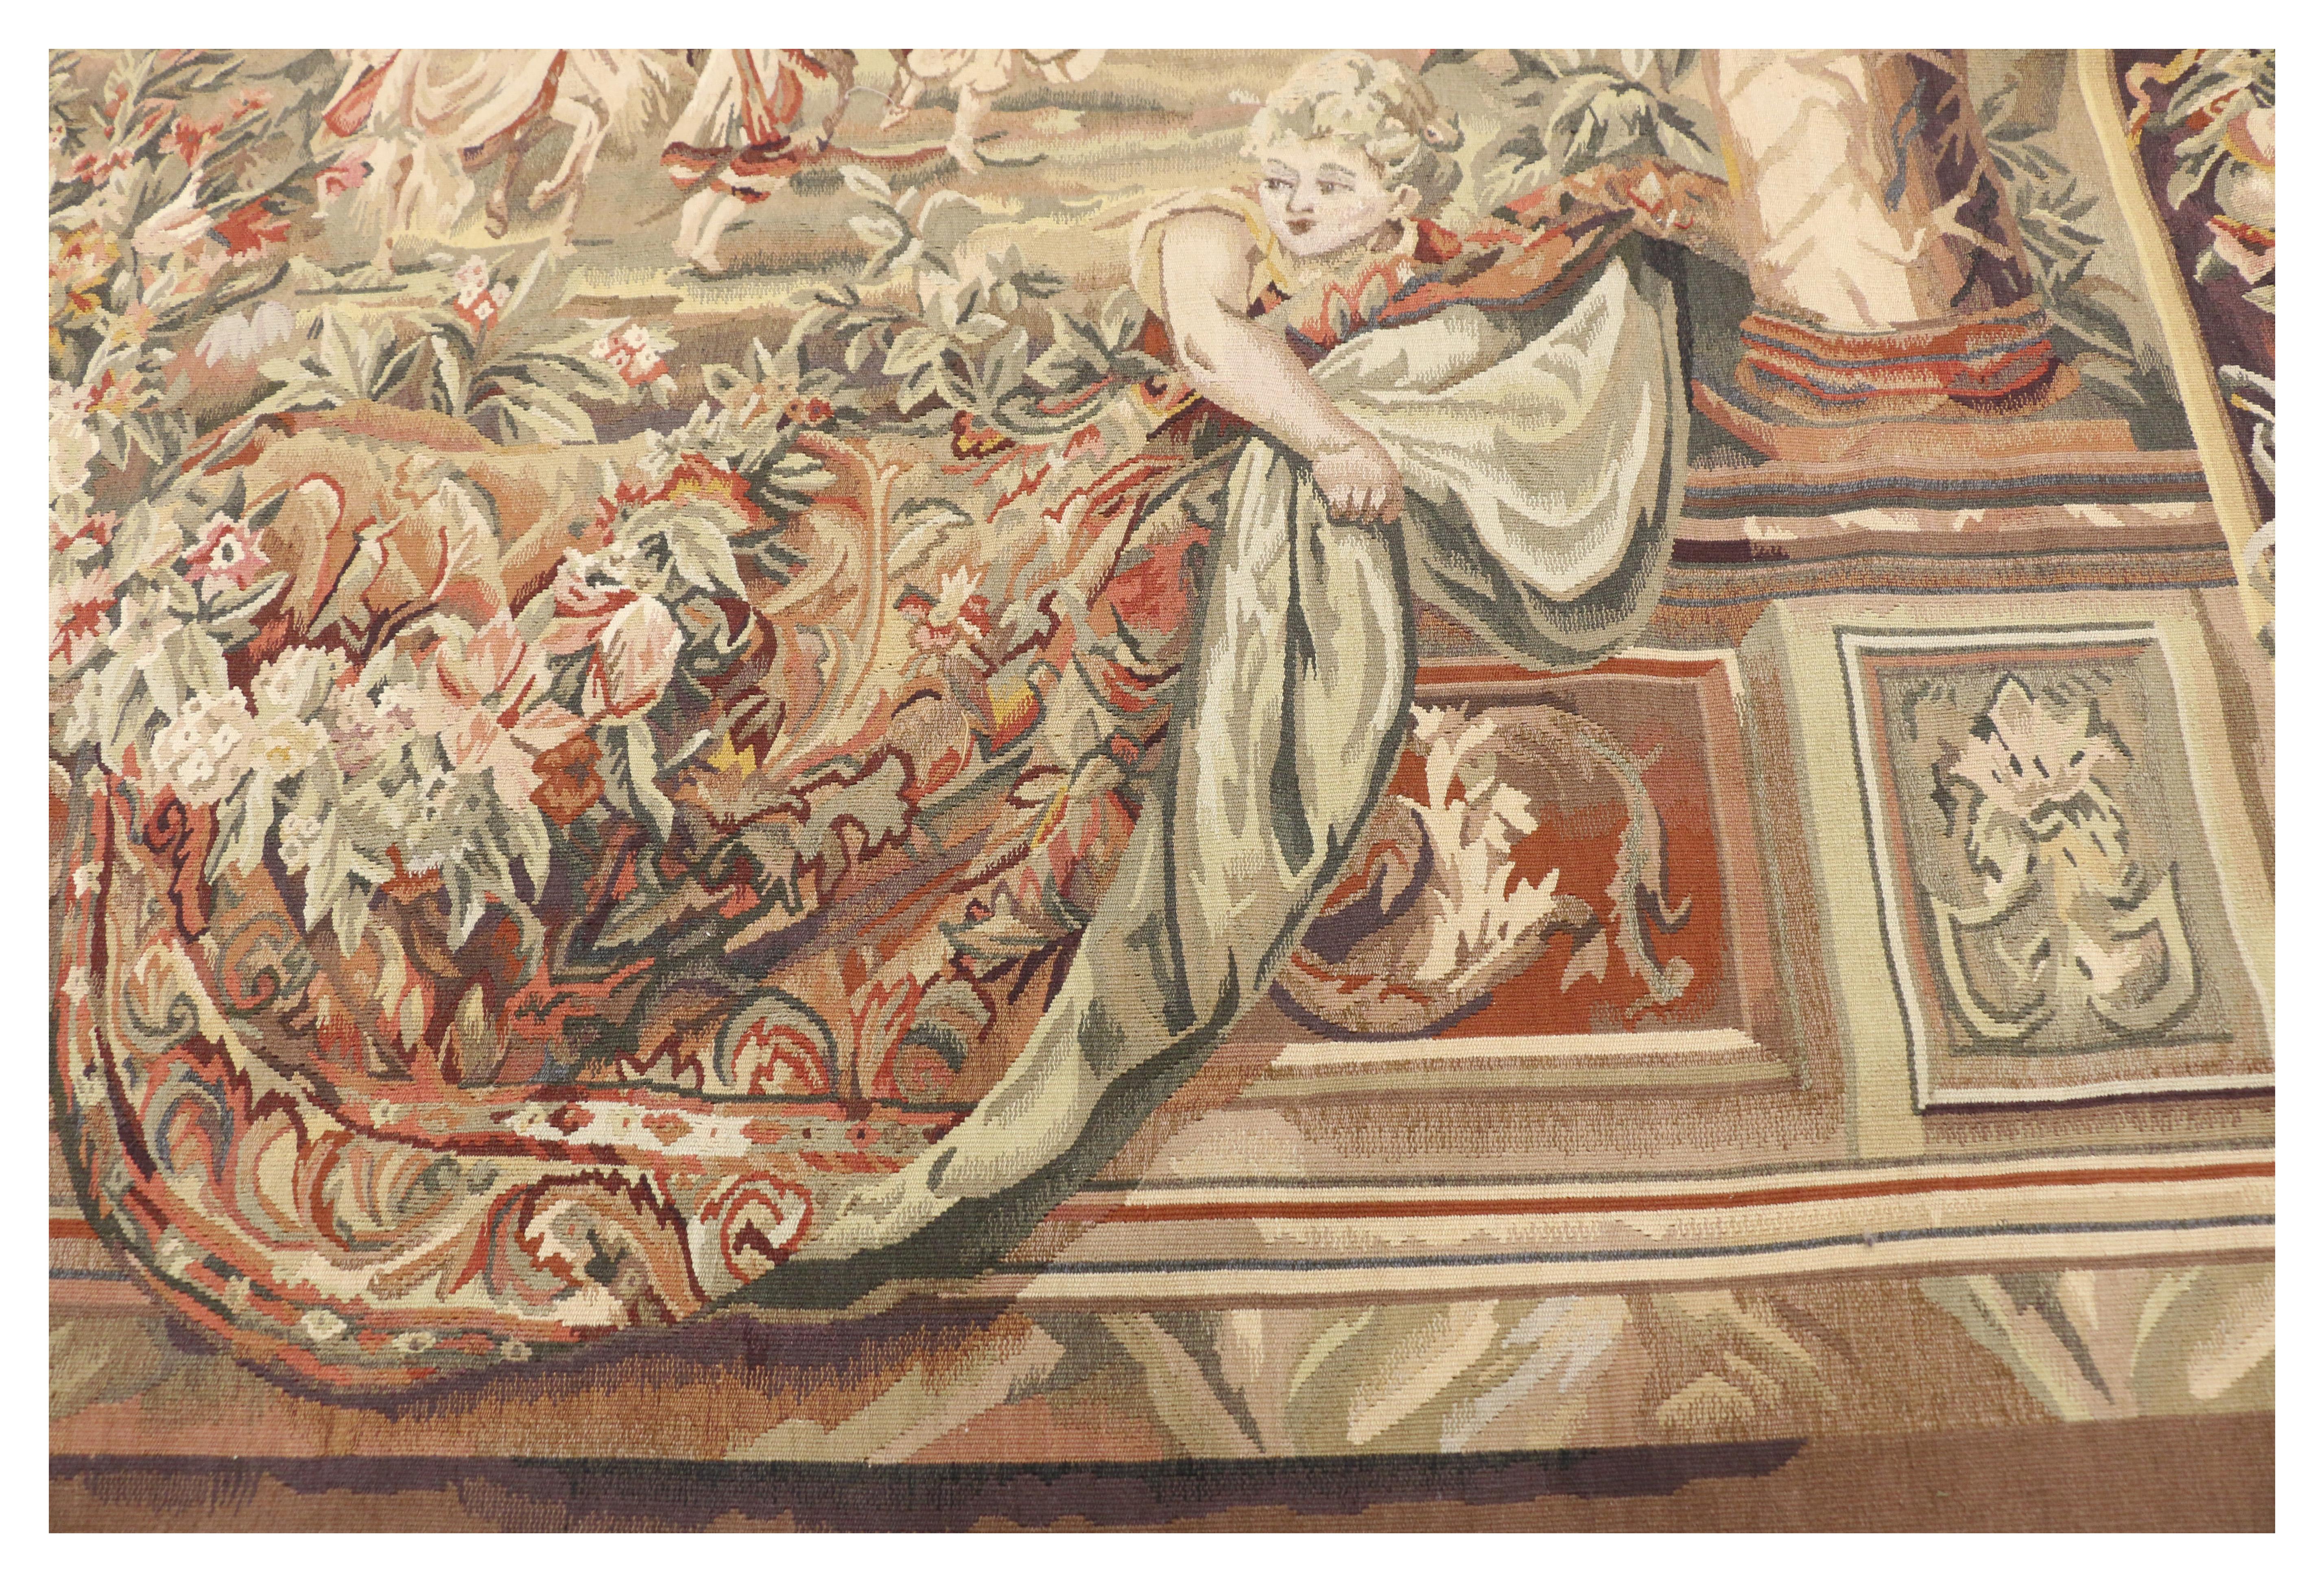 Hand-Woven Gobelins Inspired Chateau Neuf Saint-Germain Tapestry with Louis XIV Style For Sale